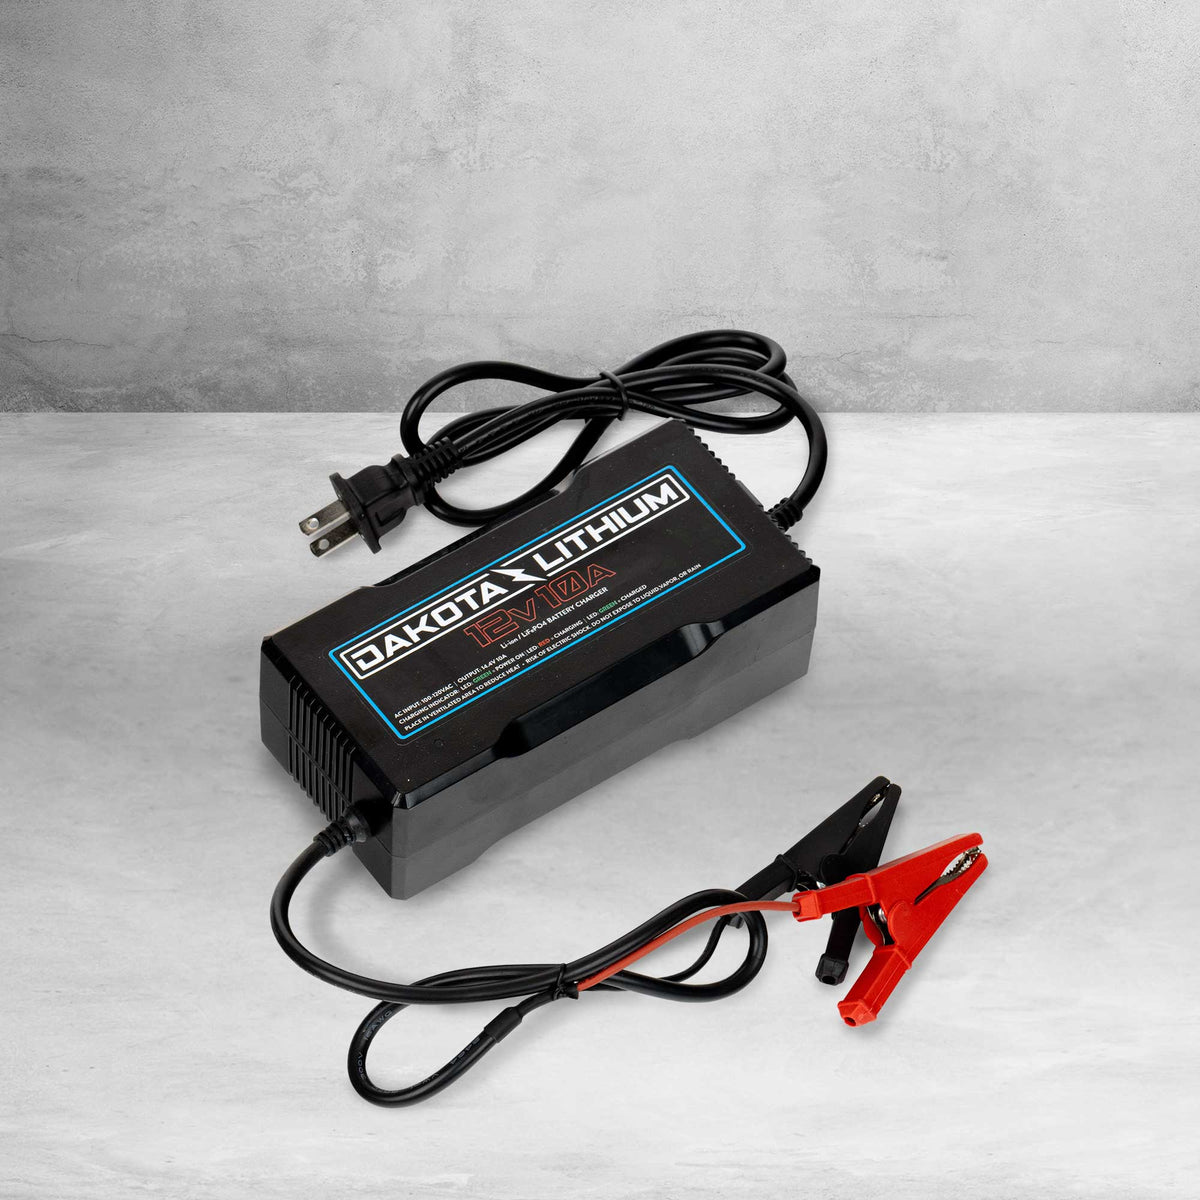 Dakota Lithium | 12V 46Ah LiFePO4 Battery | Free Charger Included